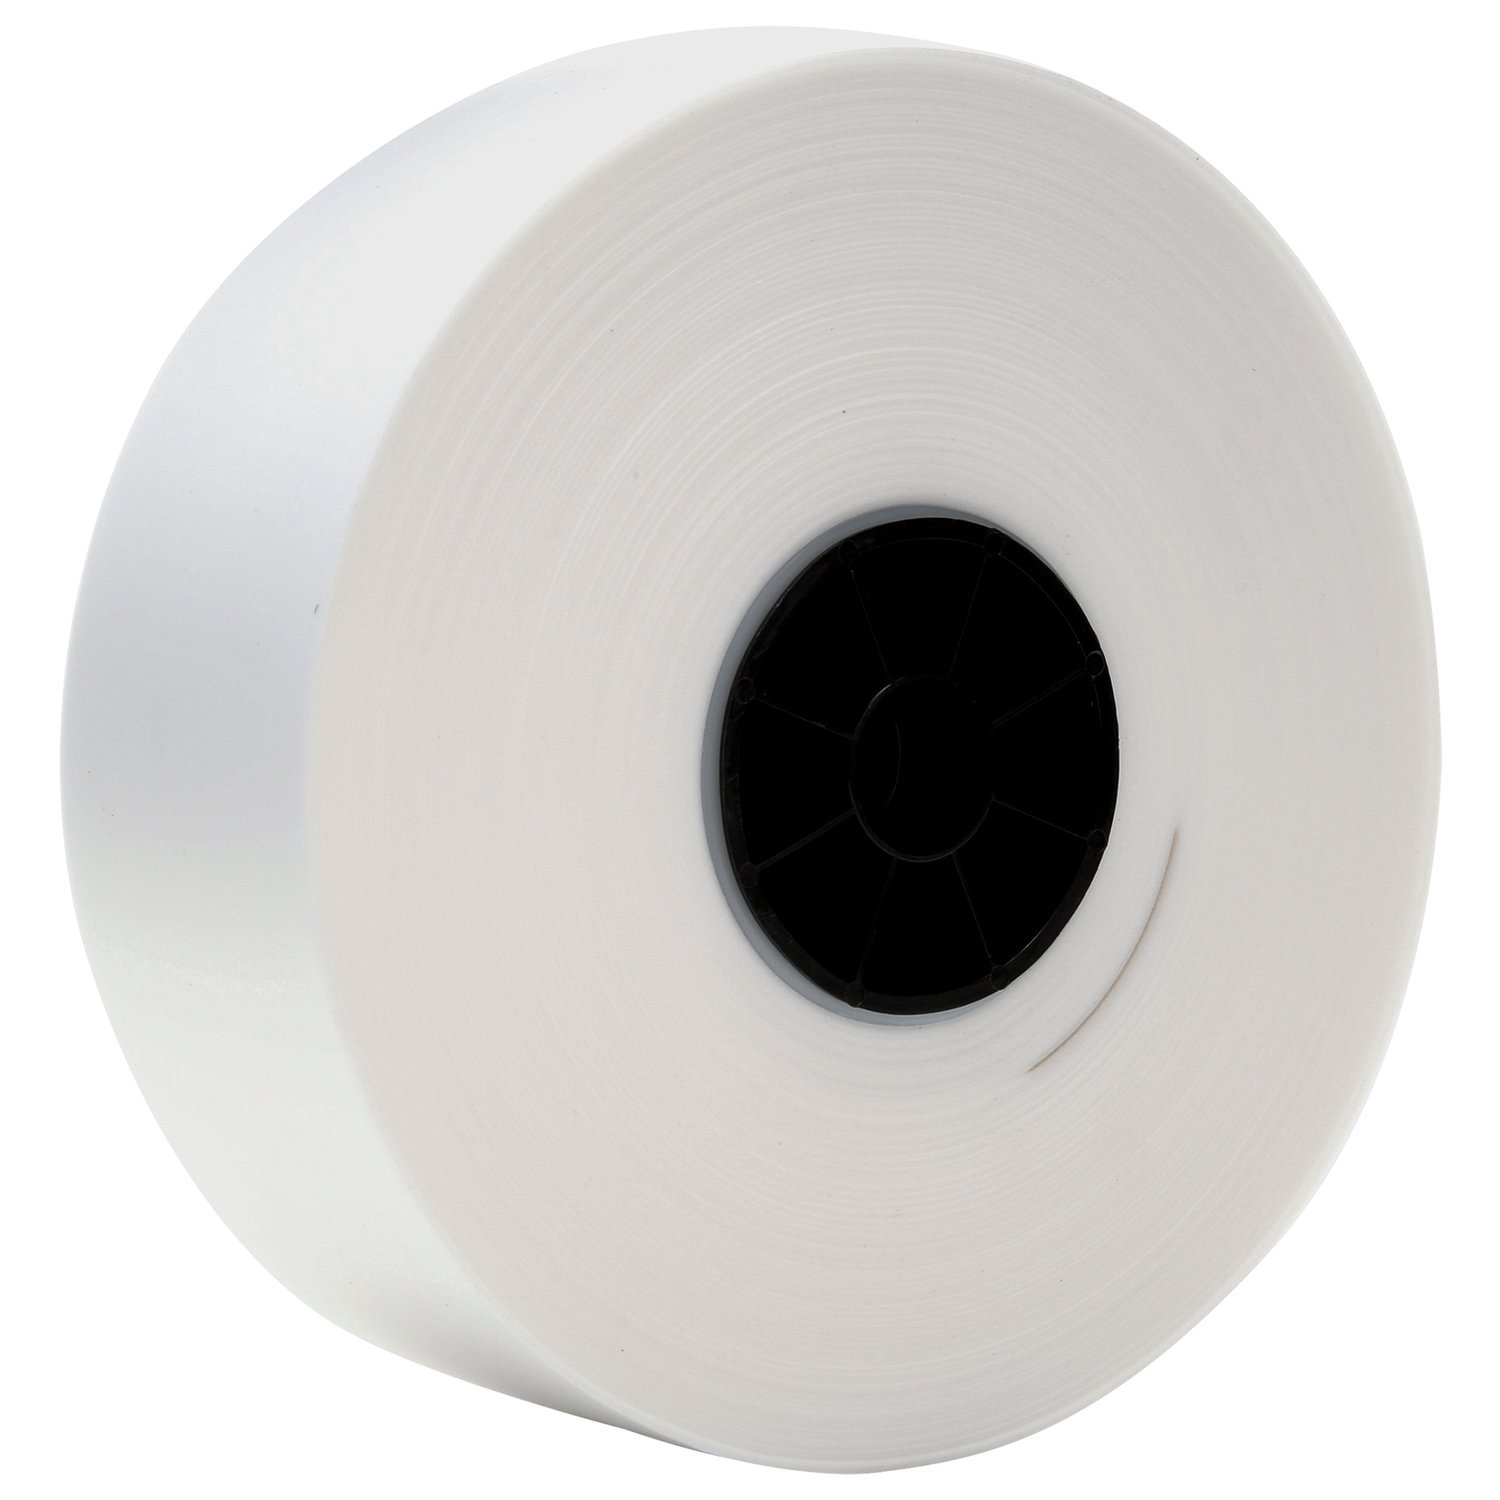 Double Sided Magnetic Sheets 0.75mm, Both Sides act as a Magnet, Large Rolls